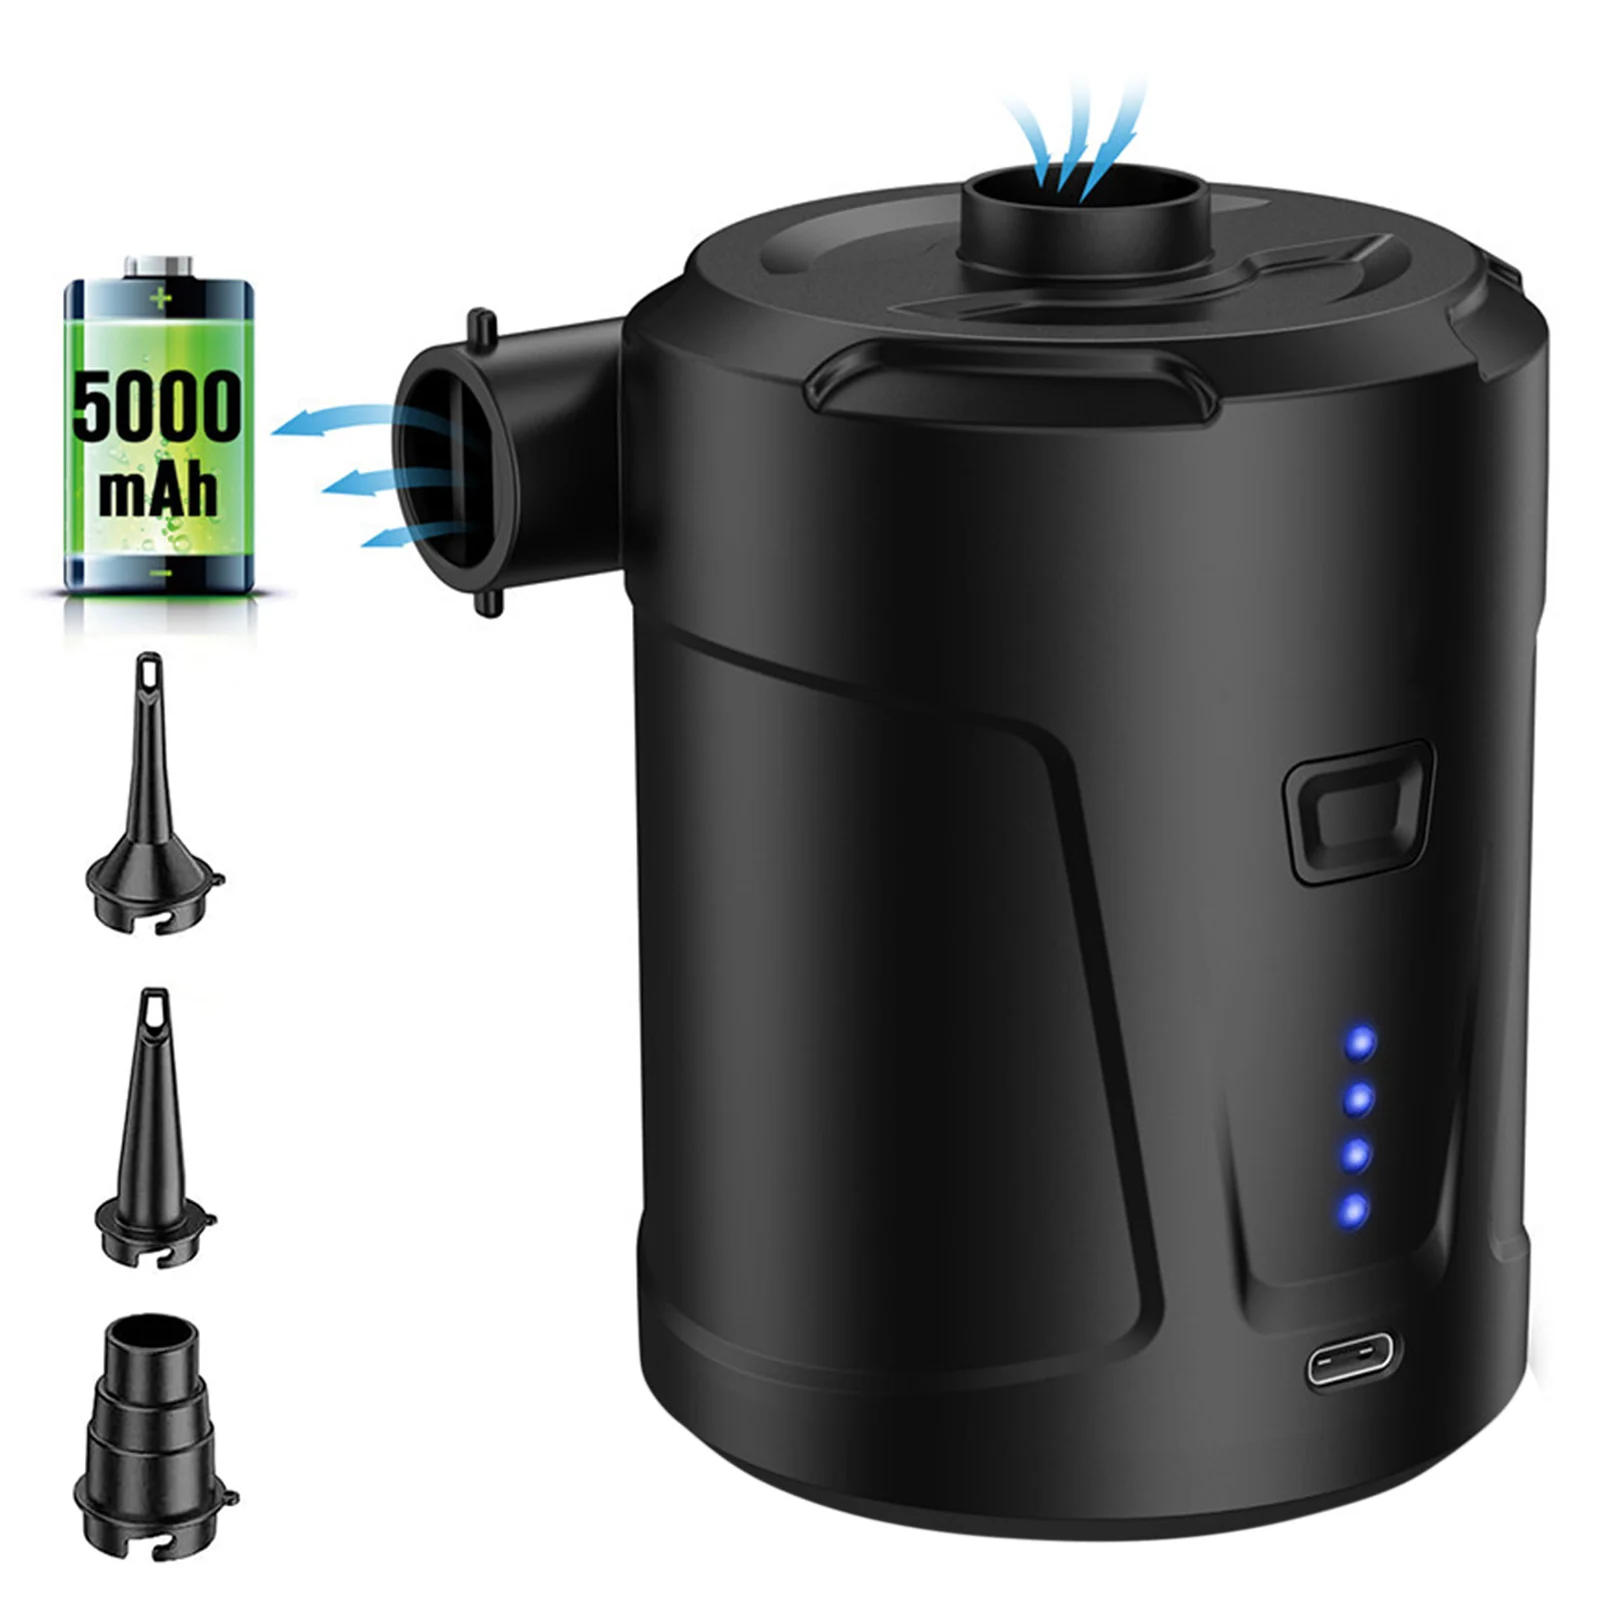 Portable Electric Air Pump 5000mAh Built-in Battery Quick-Fill with 3 Nozzles Inflator/Deflator Pumps for Camping Air Mattress